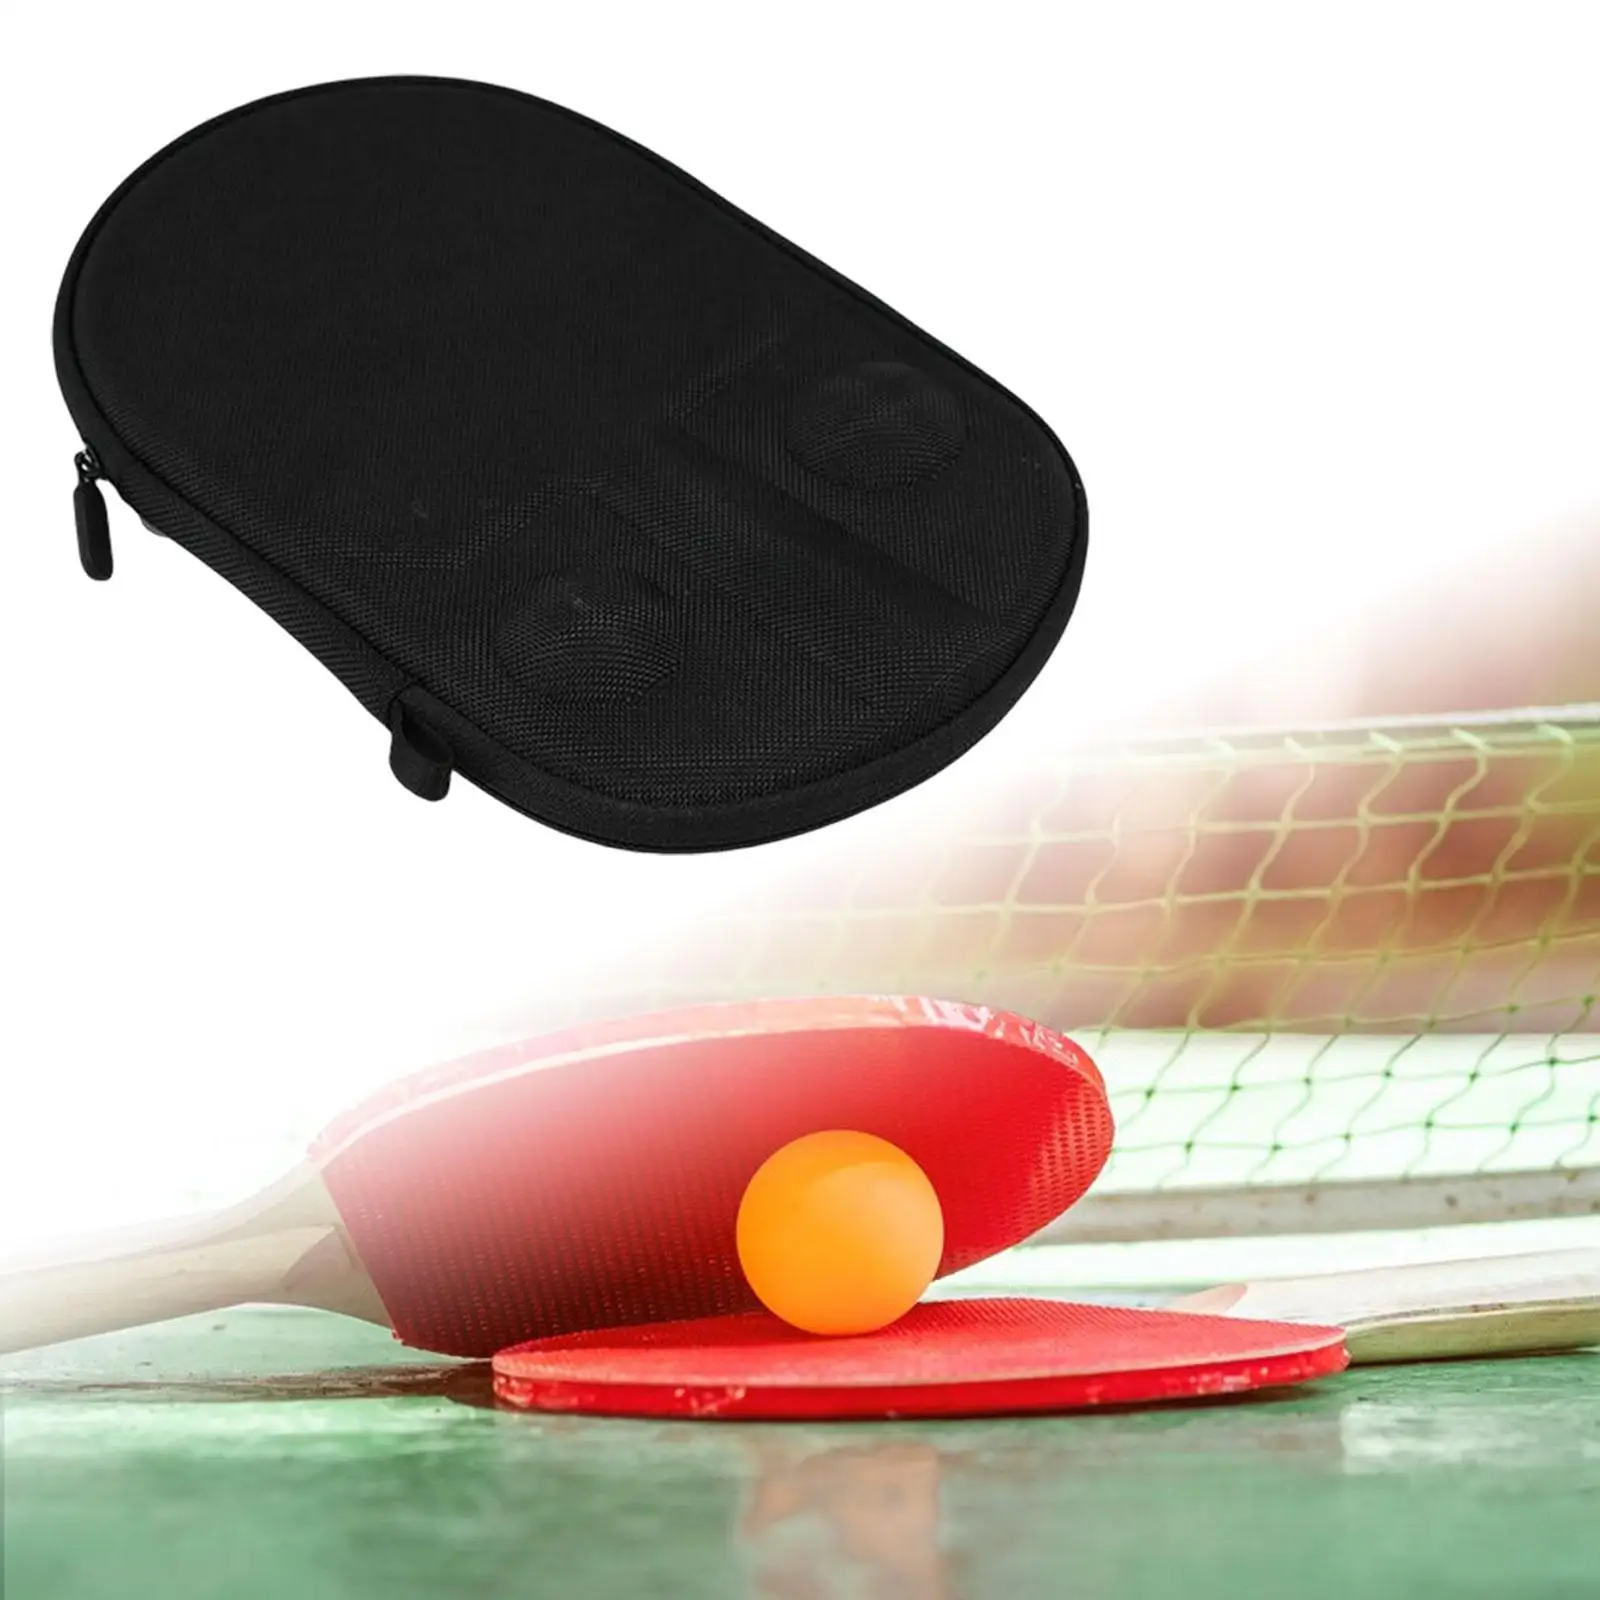 Portable Table Tennis Racket Bag Pong Paddle Bag Storage Case Hold 1 Racket and two balls Durable for Training Competition